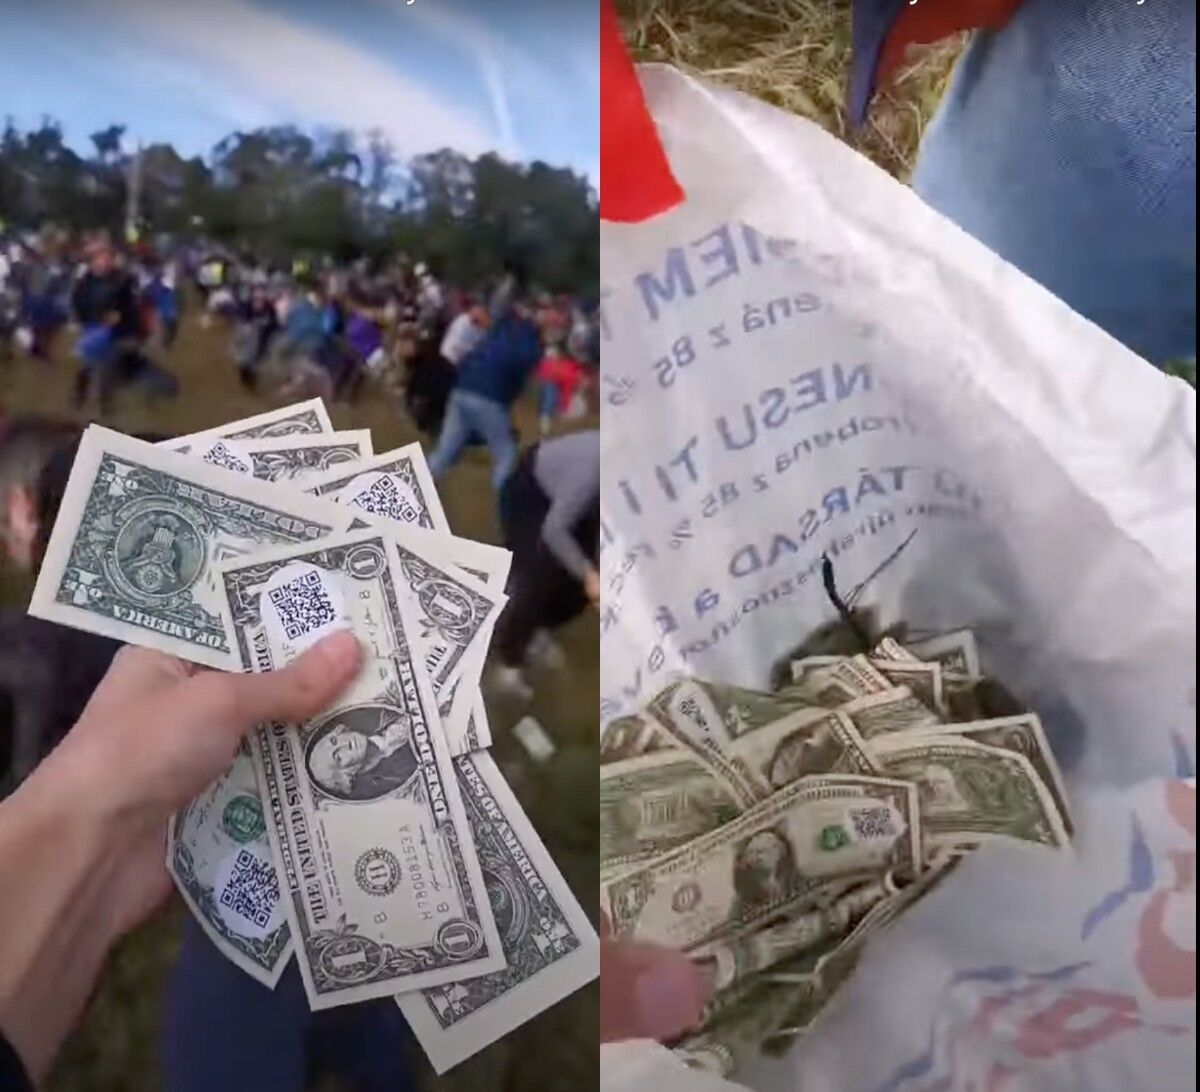 In the Czech Republic, a million dollars was dropped from a helicopter: thousands of people collected money in plastic bags. Video